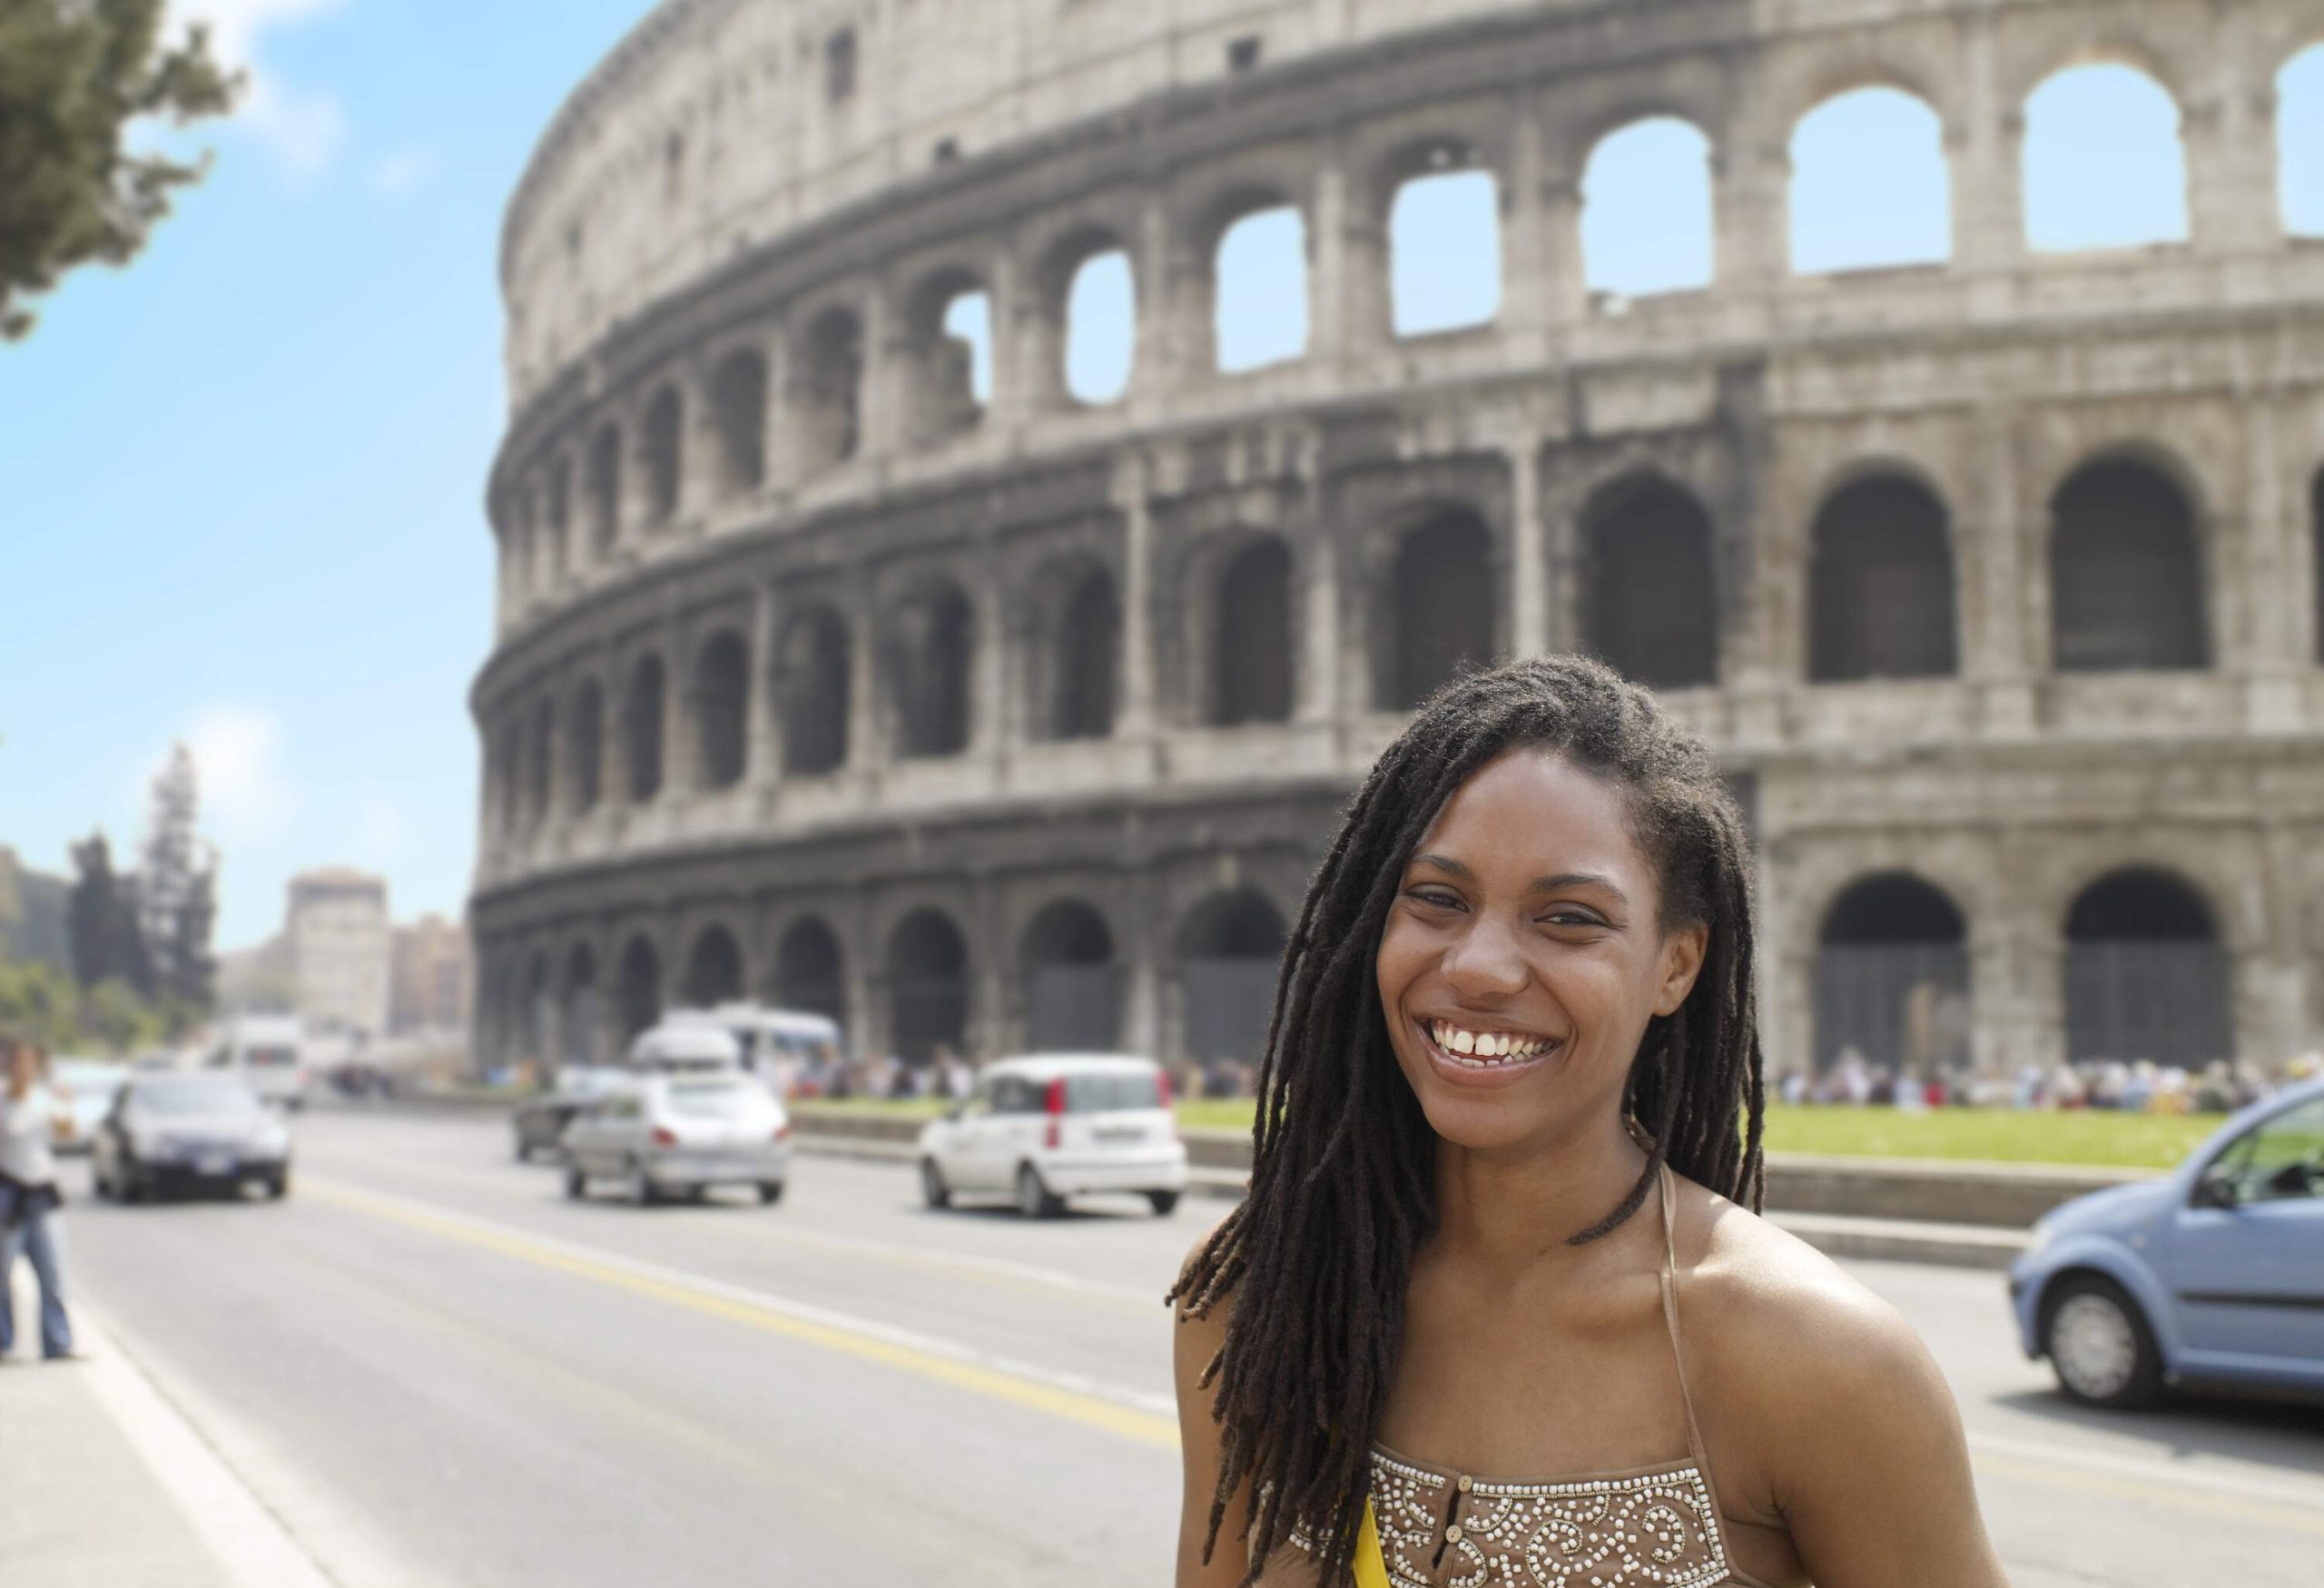 SMILING WOMAN STANDING IN FRONT OF THE COLISEUM ON A SUNNY SUMMER DAY